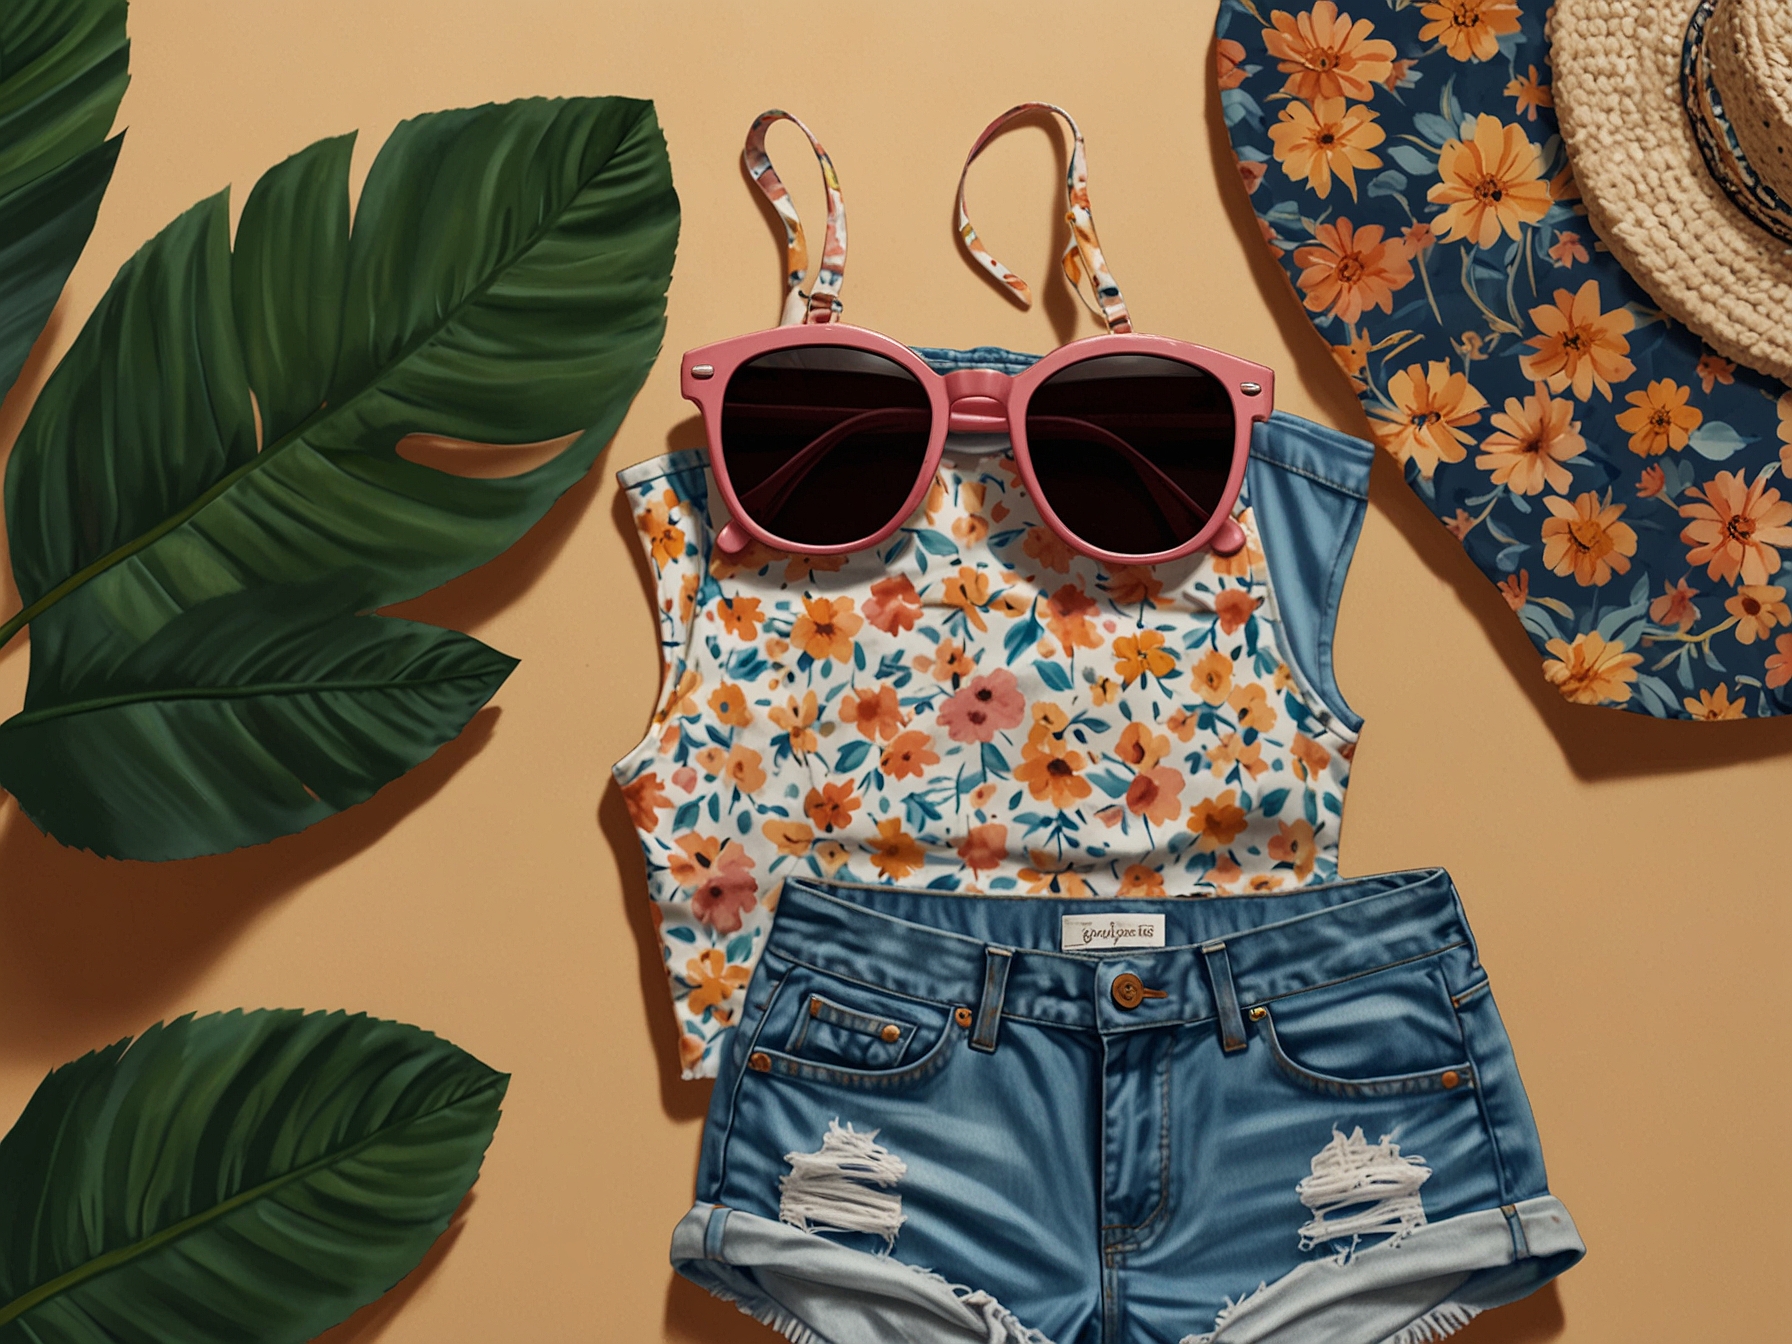 Close-up of a laid-out summer outfit featuring high-waisted denim shorts, a floral tank top, and matching accessories including sunglasses and a tote bag, showcasing versatile wardrobe staples.